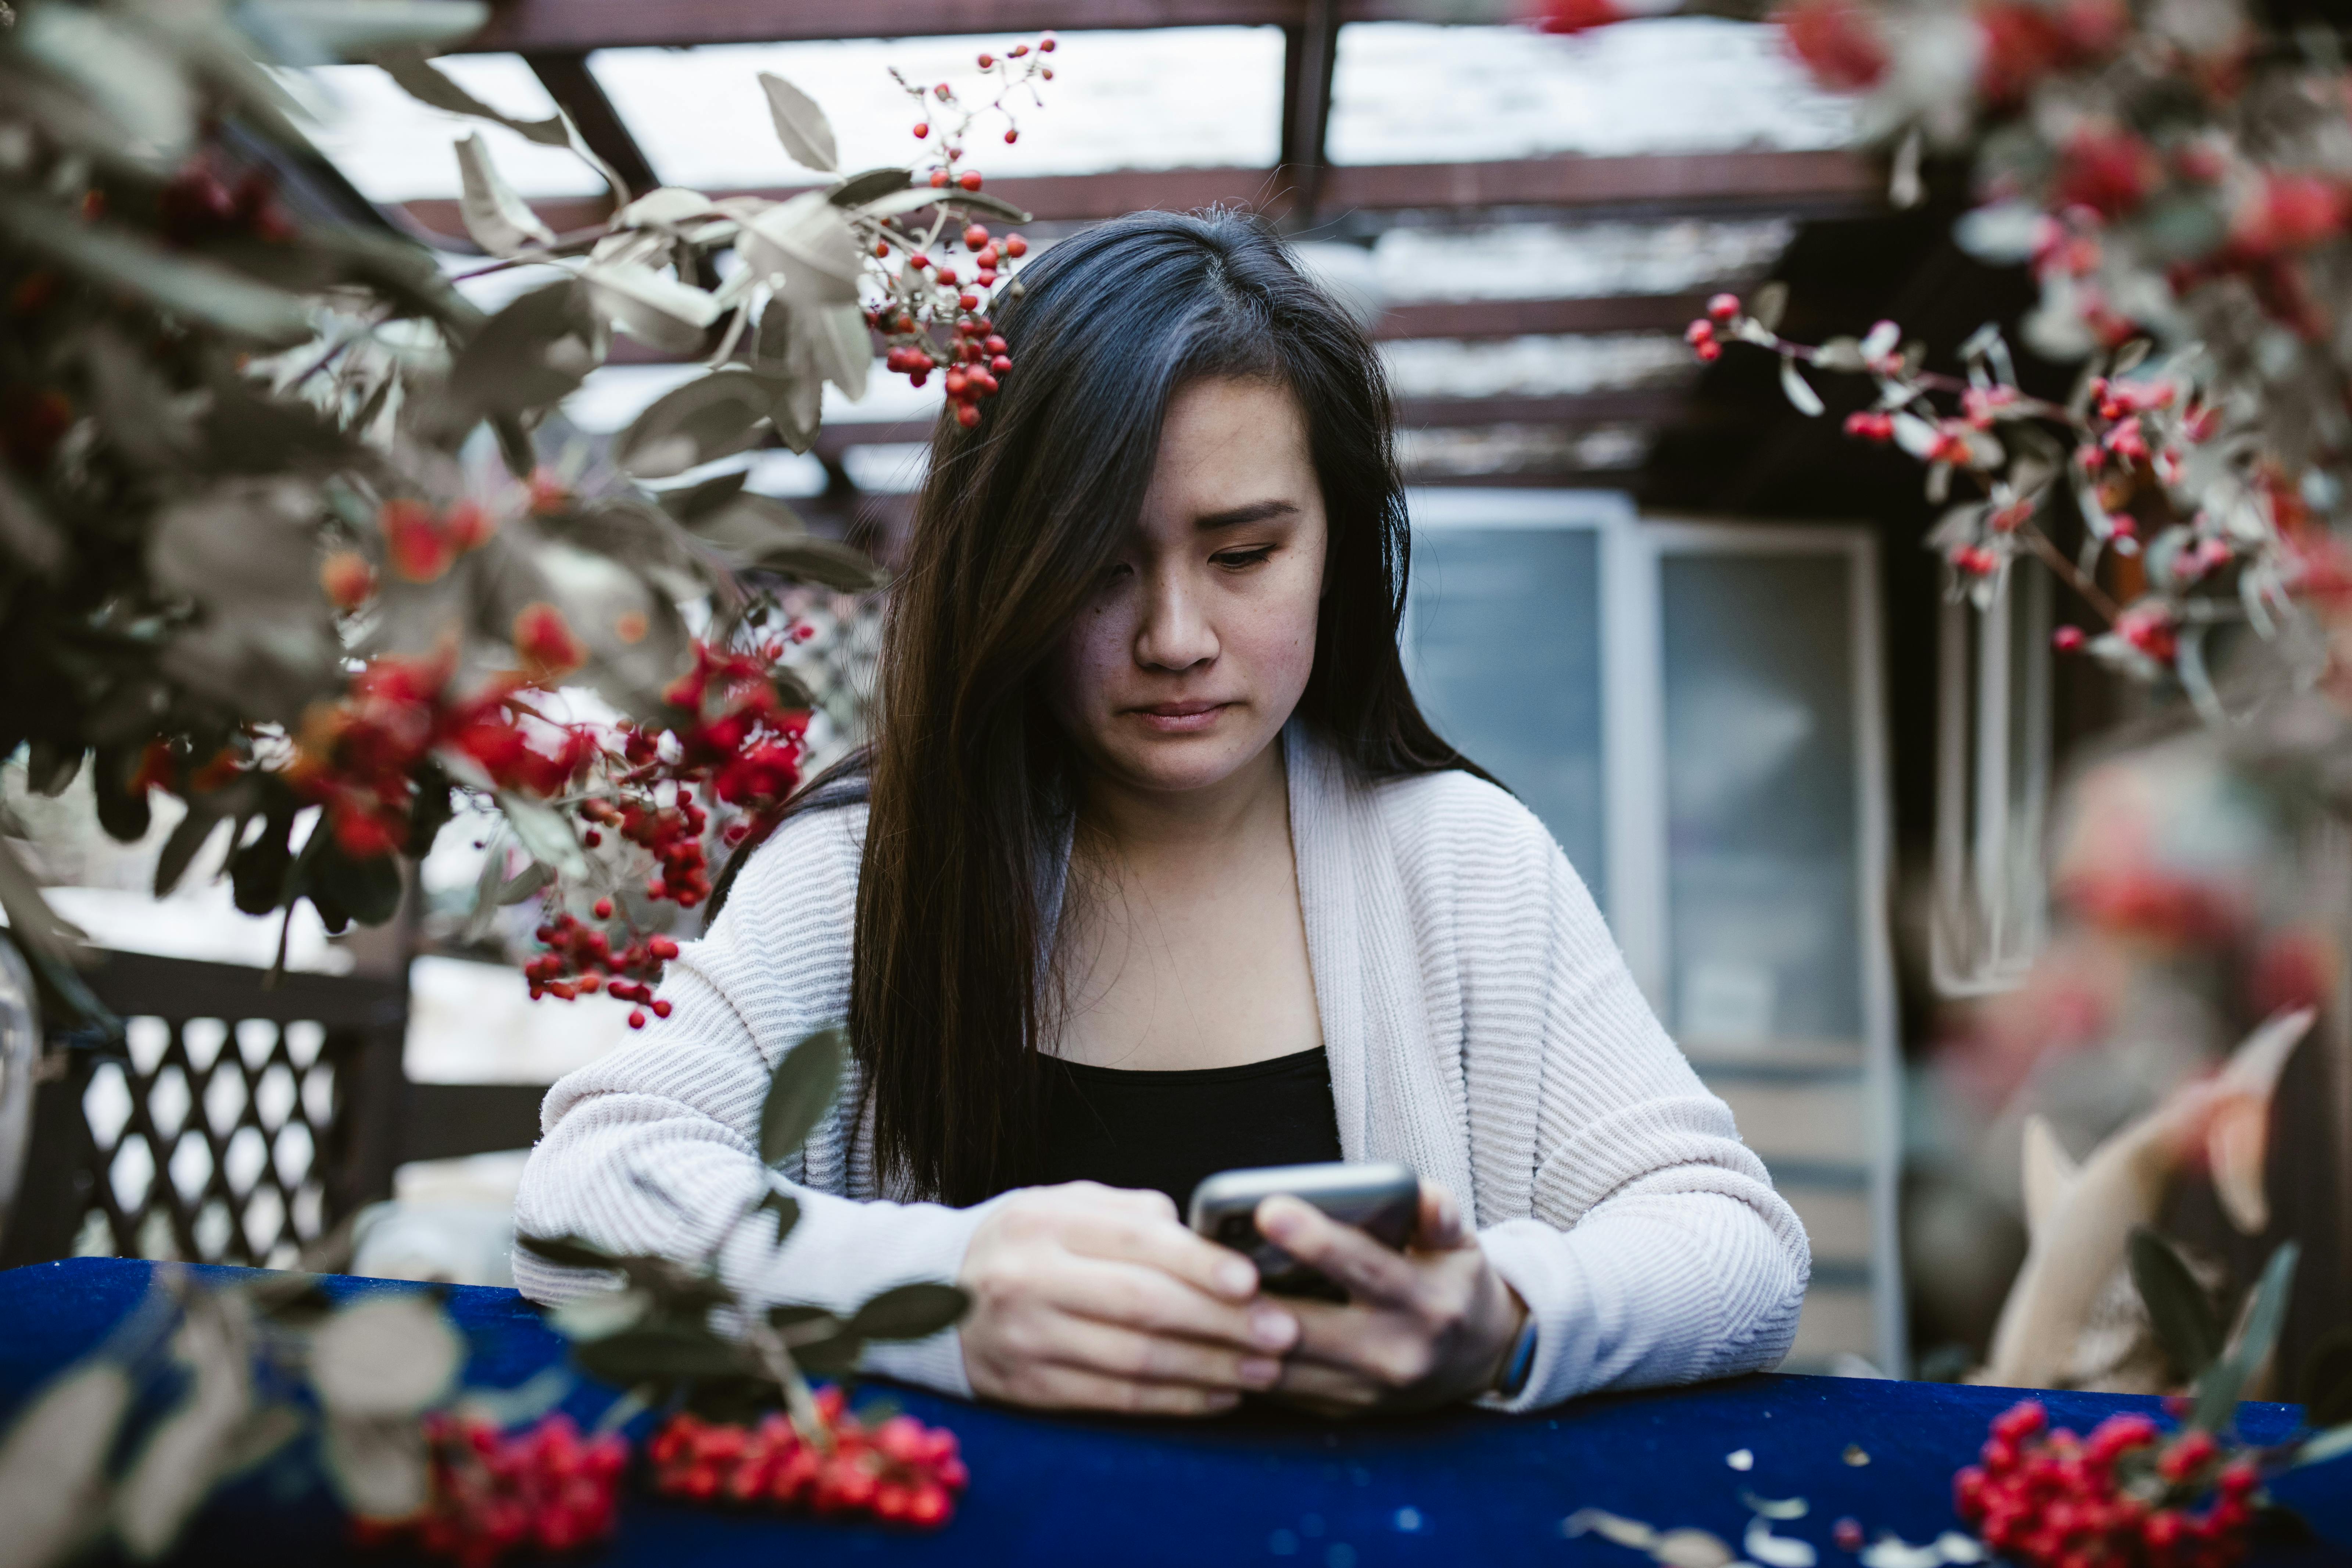 A sad woman looking at her phone | Source: Pexels